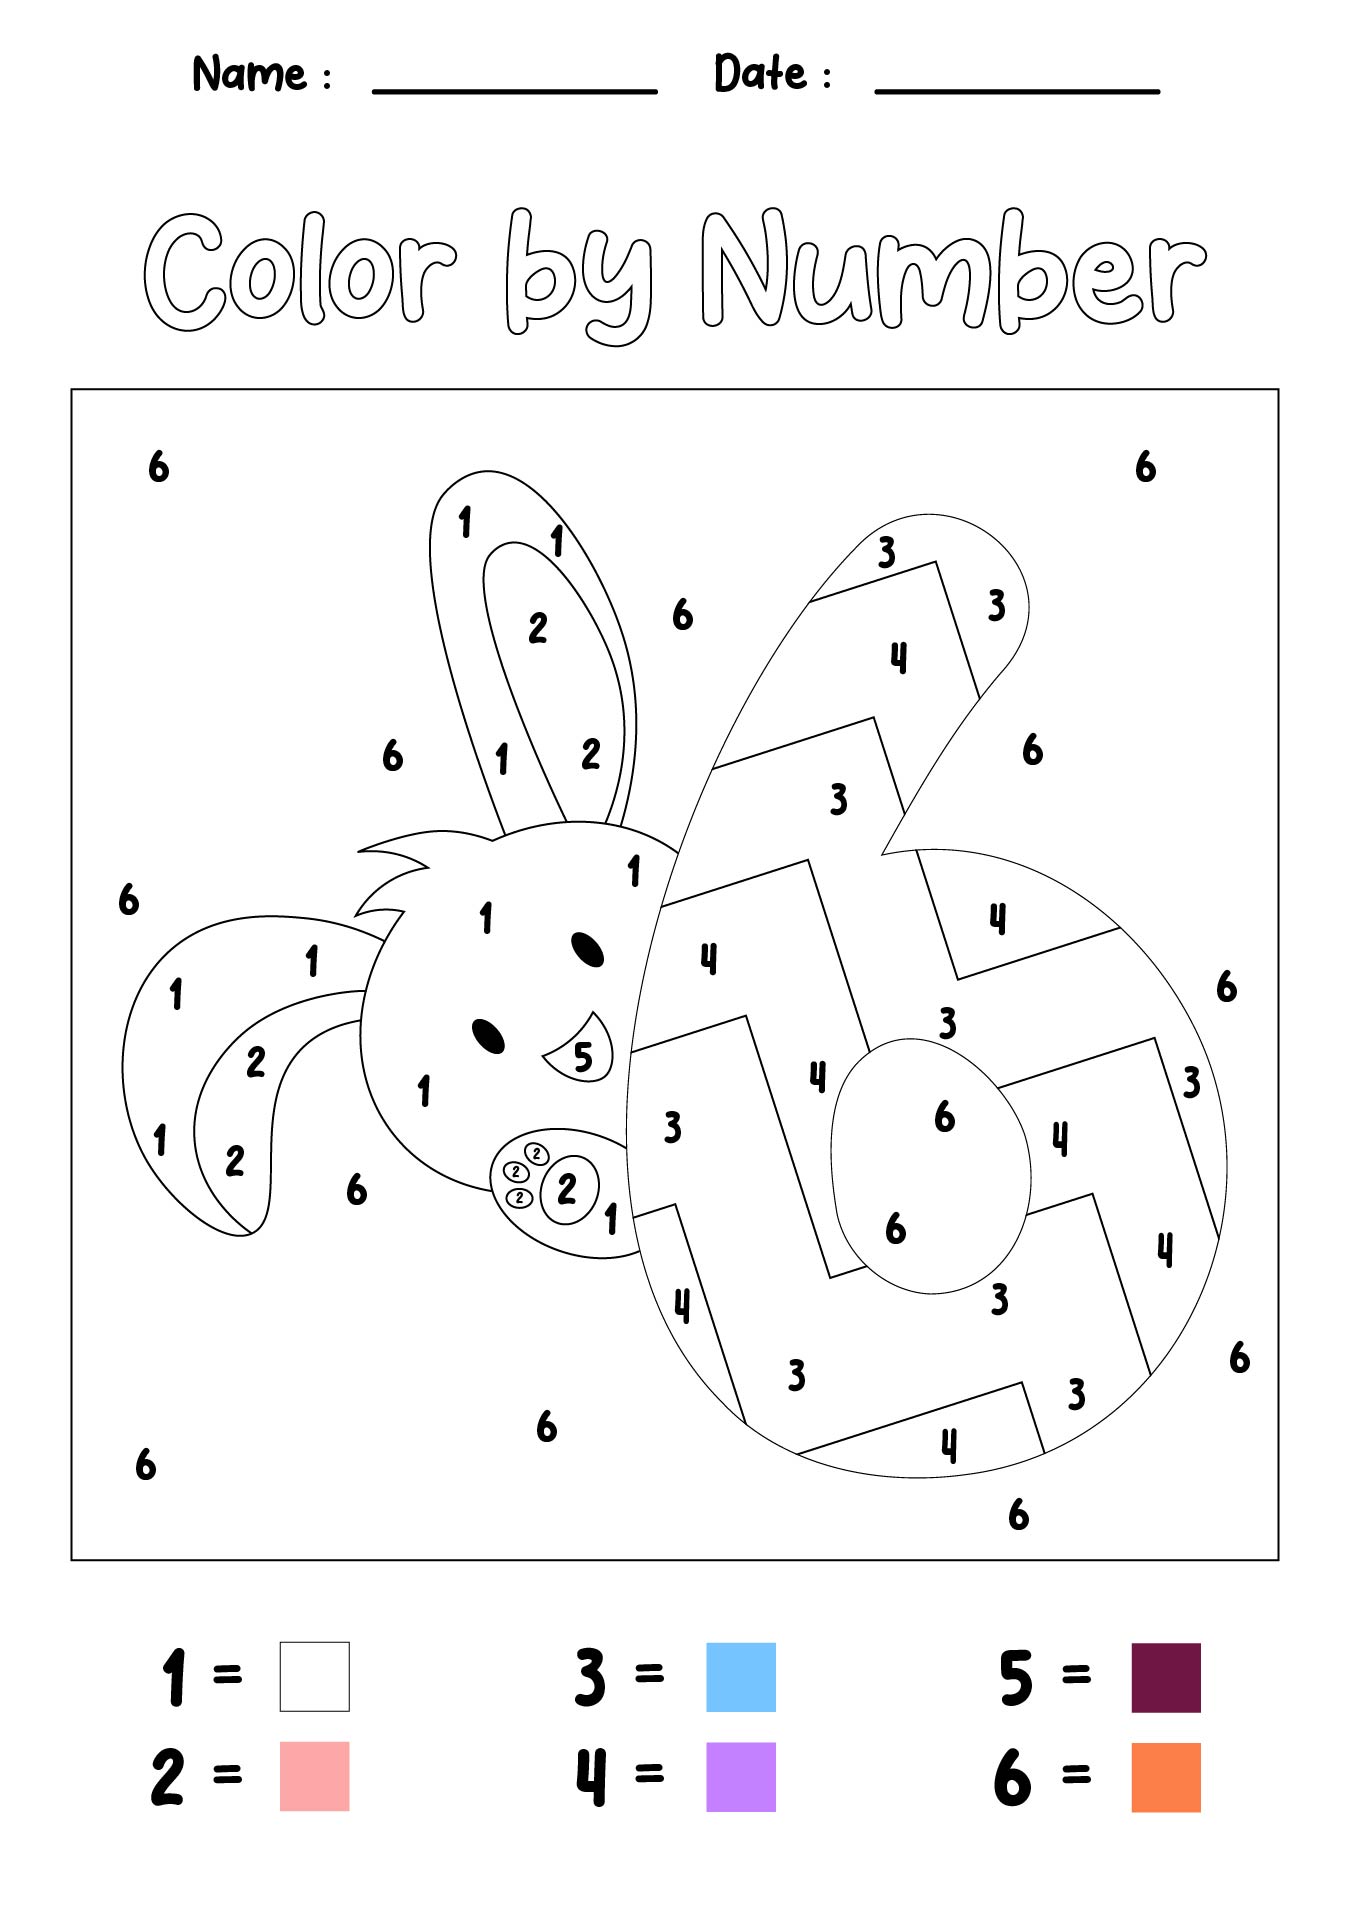 5-best-images-of-printable-color-by-number-worksheets-pre-k-pre-k-math-worksheets-printable